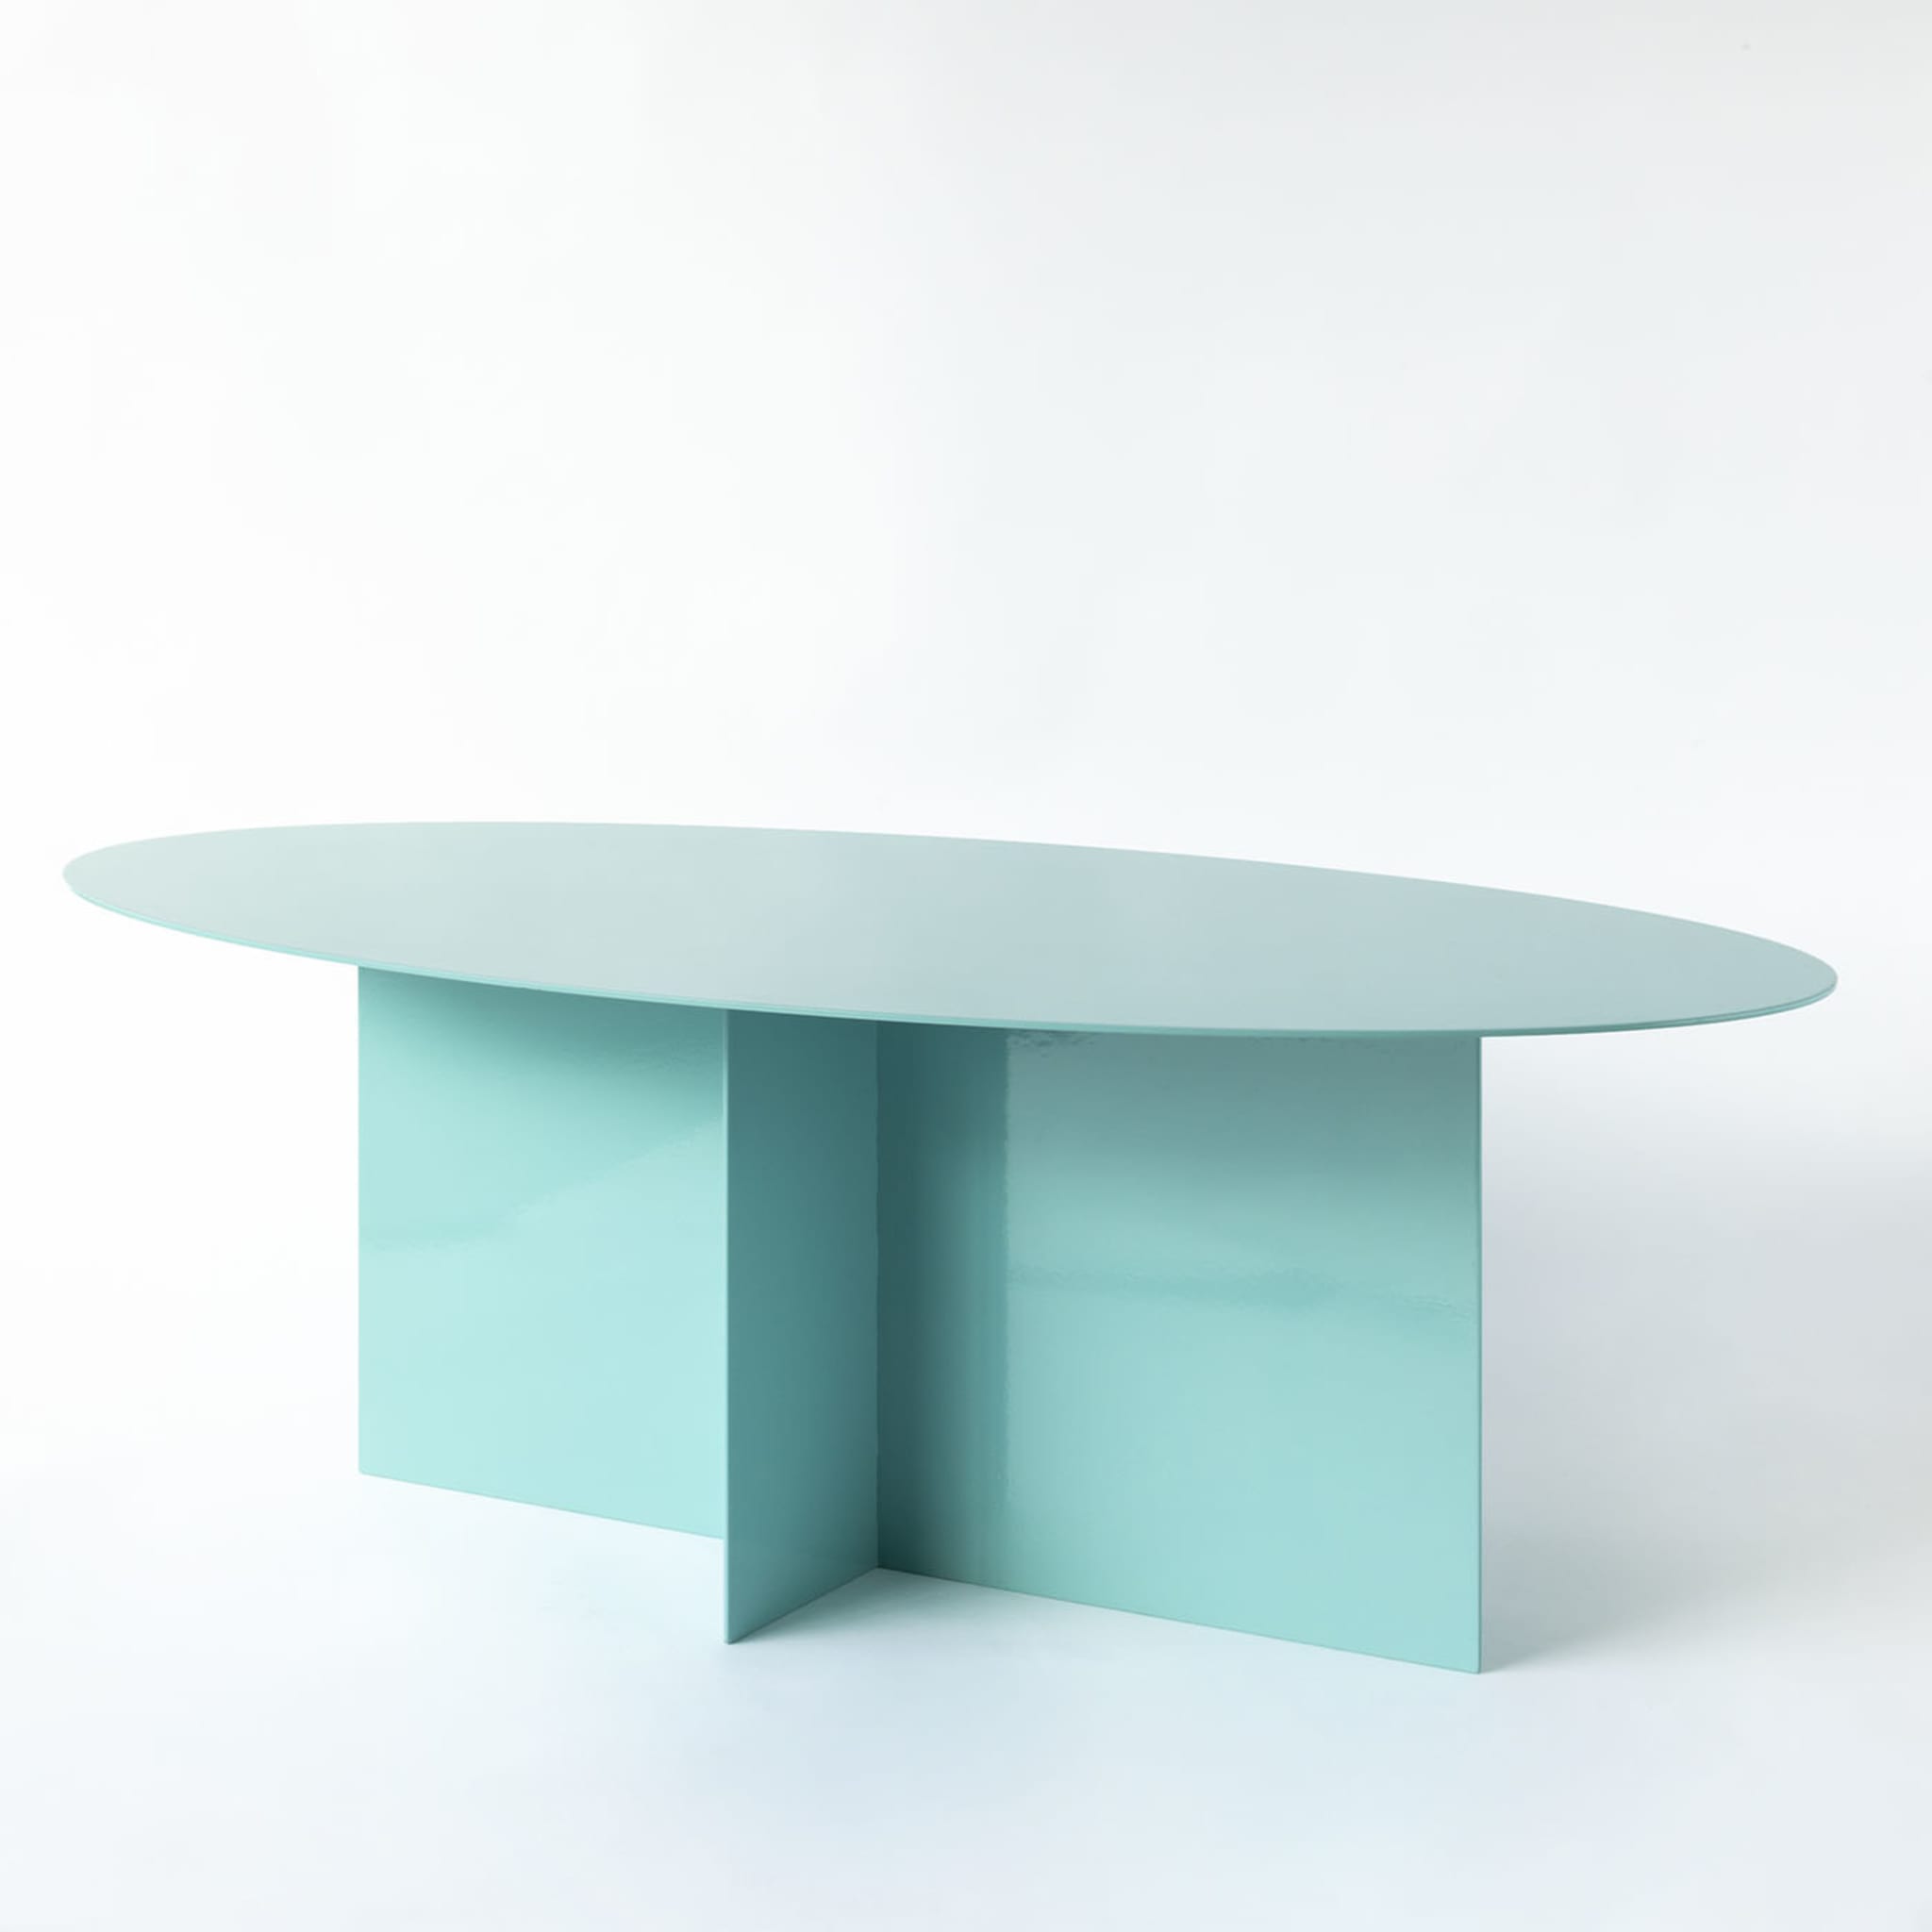 Across Oval Coffe Table Elliptical by Claudia Pignatale - Alternative view 3